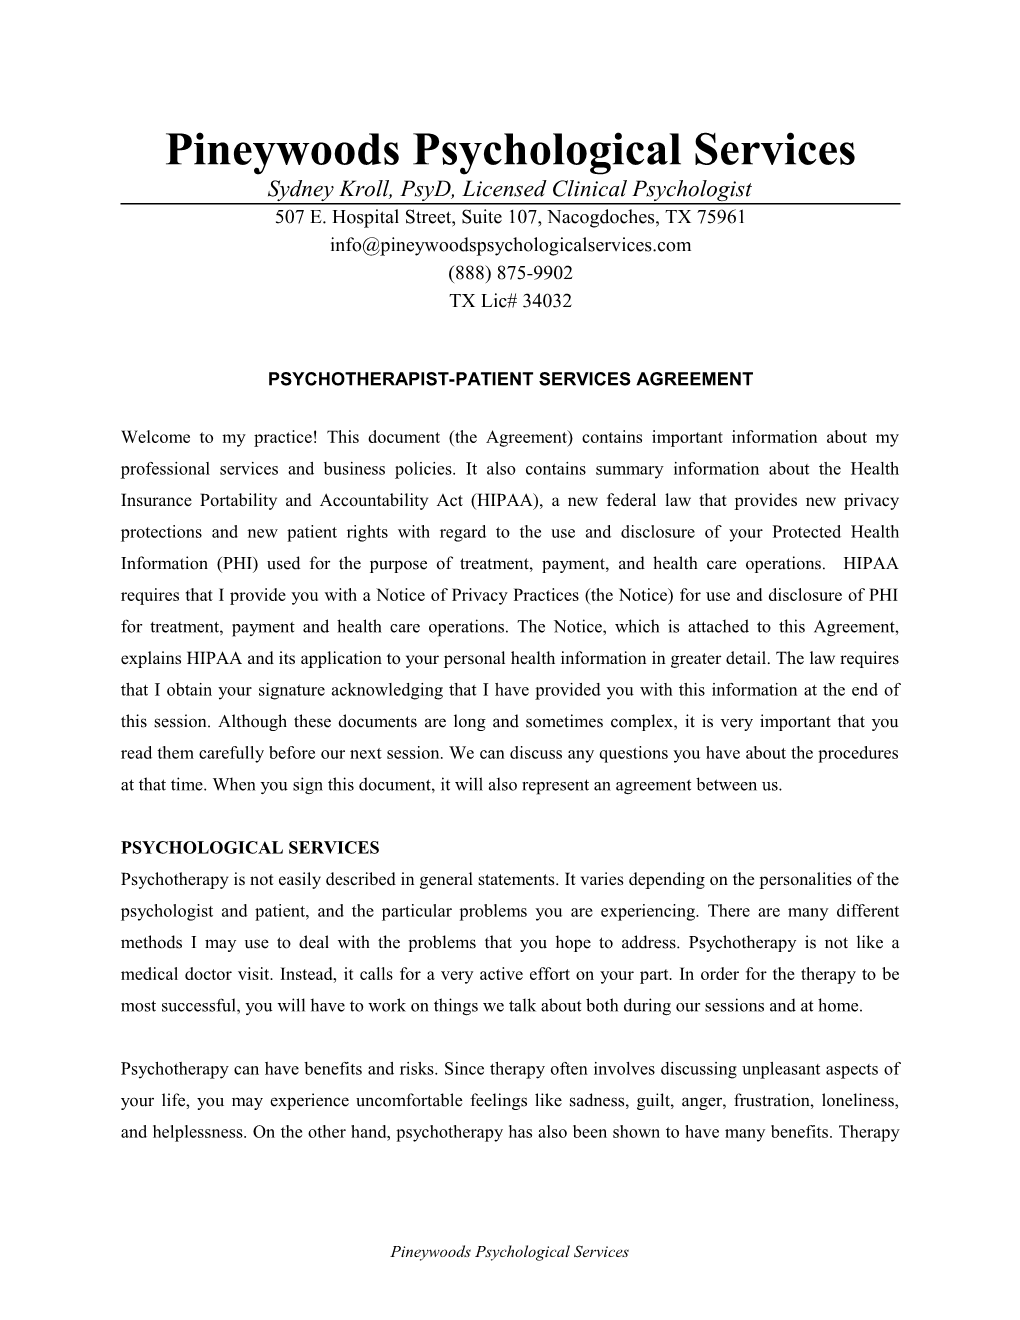 Pineywoods Psychological Services